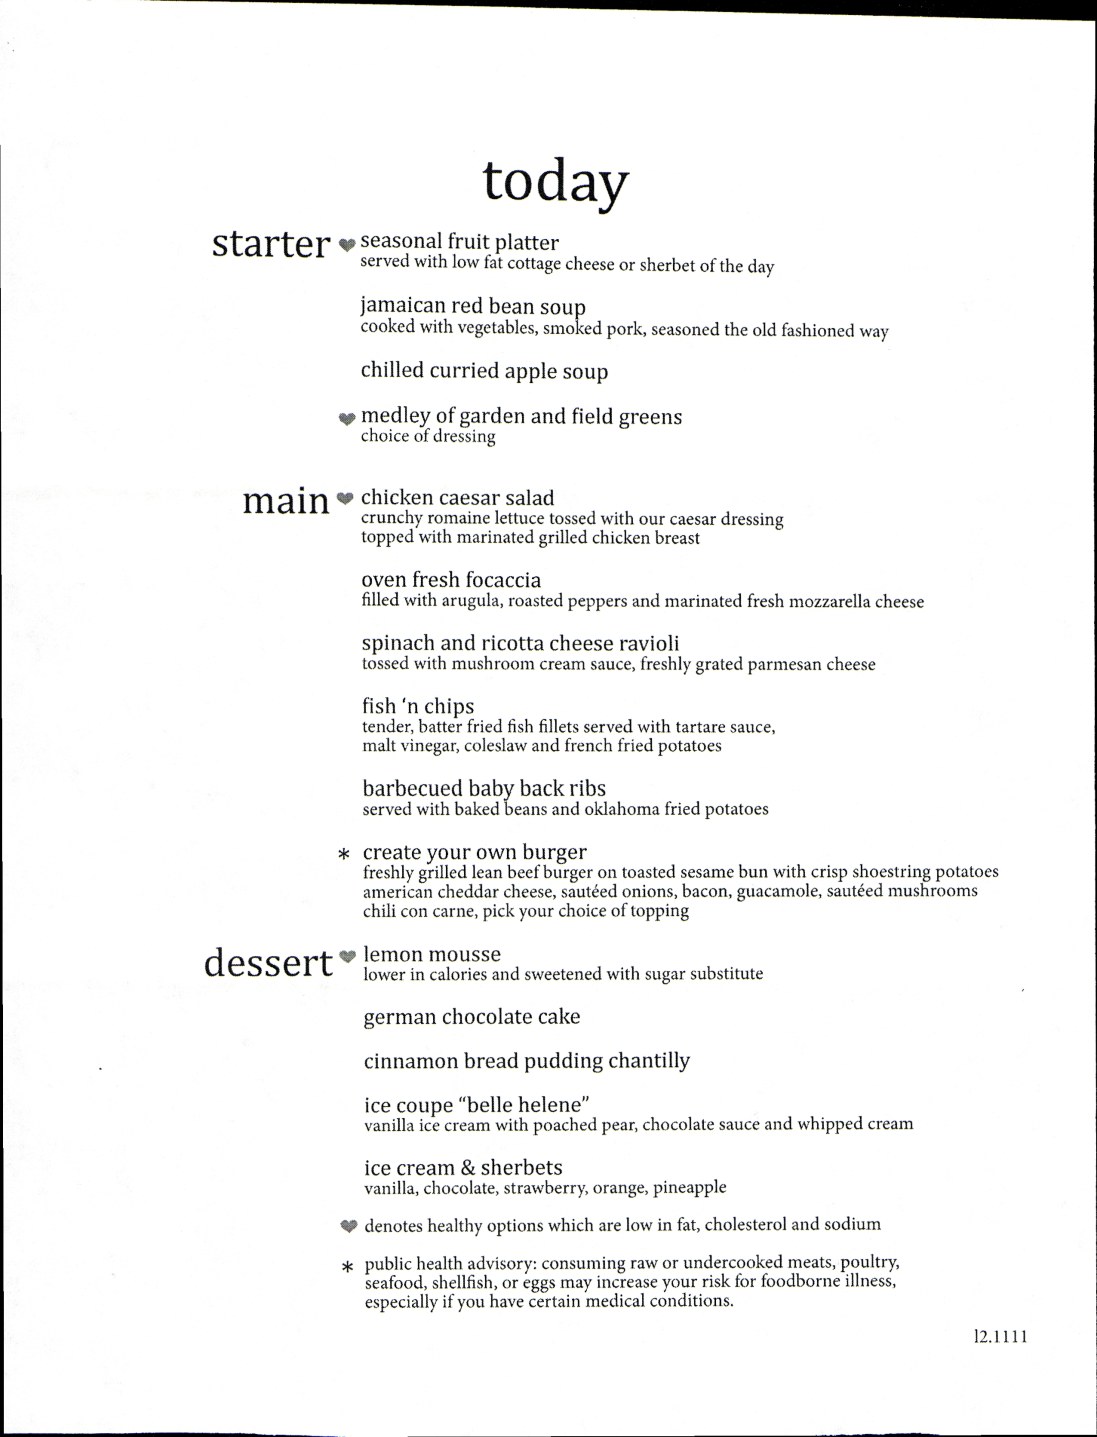 Lunch Menu 2 - not used this cruise